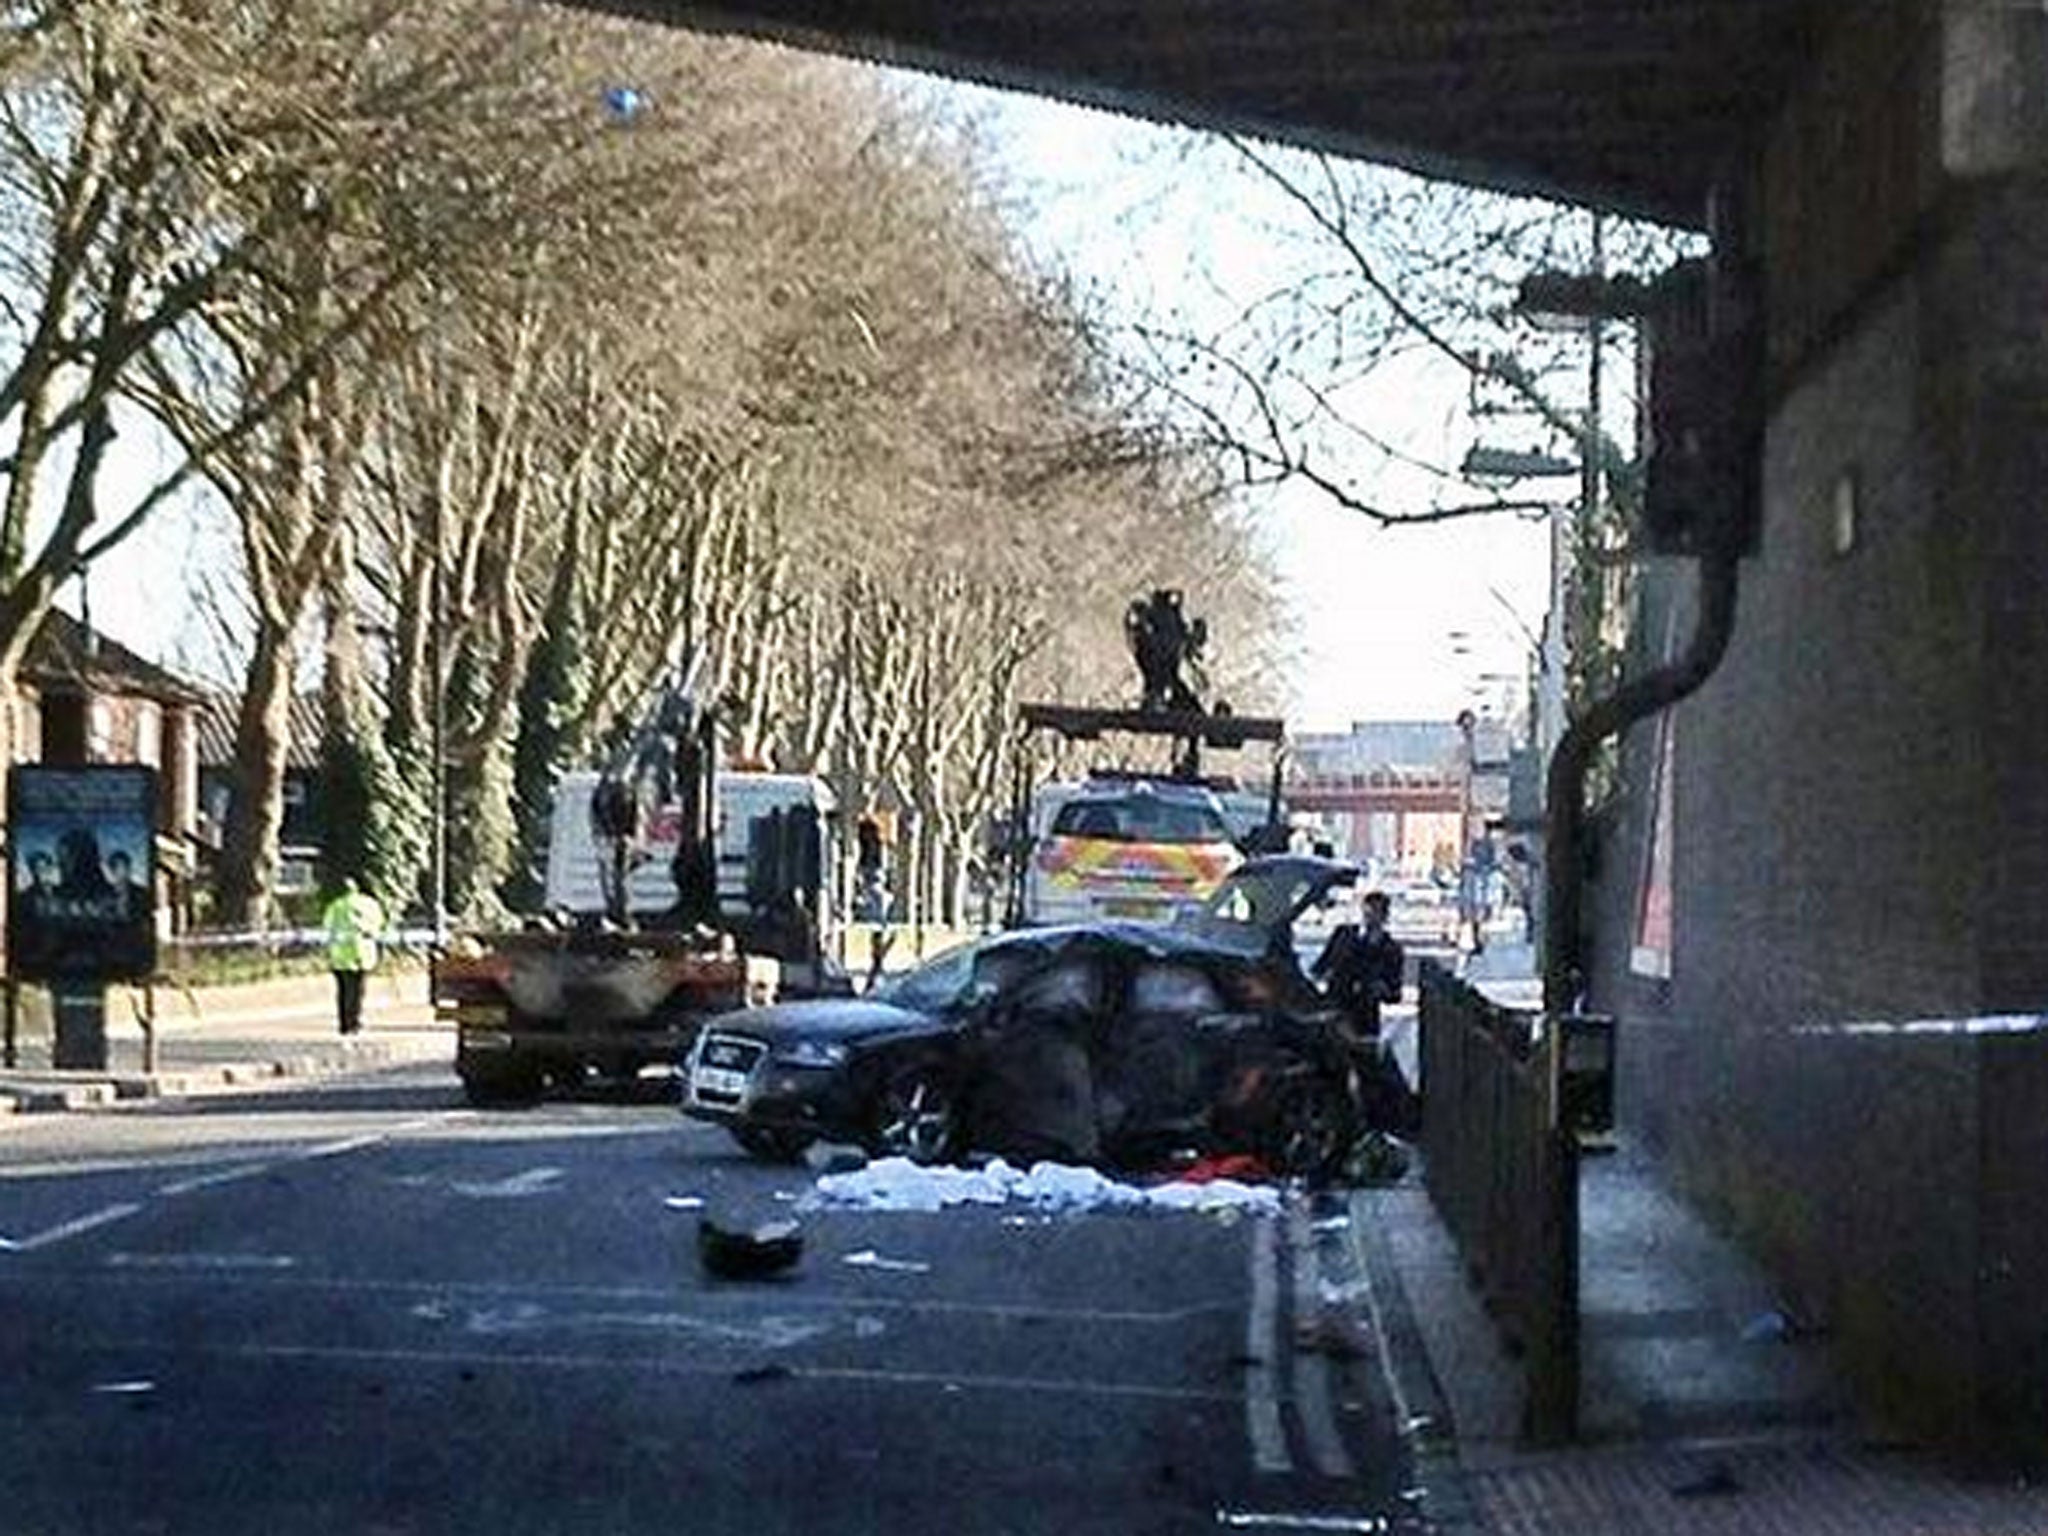 Two men have died in this crash after a police chase in north London